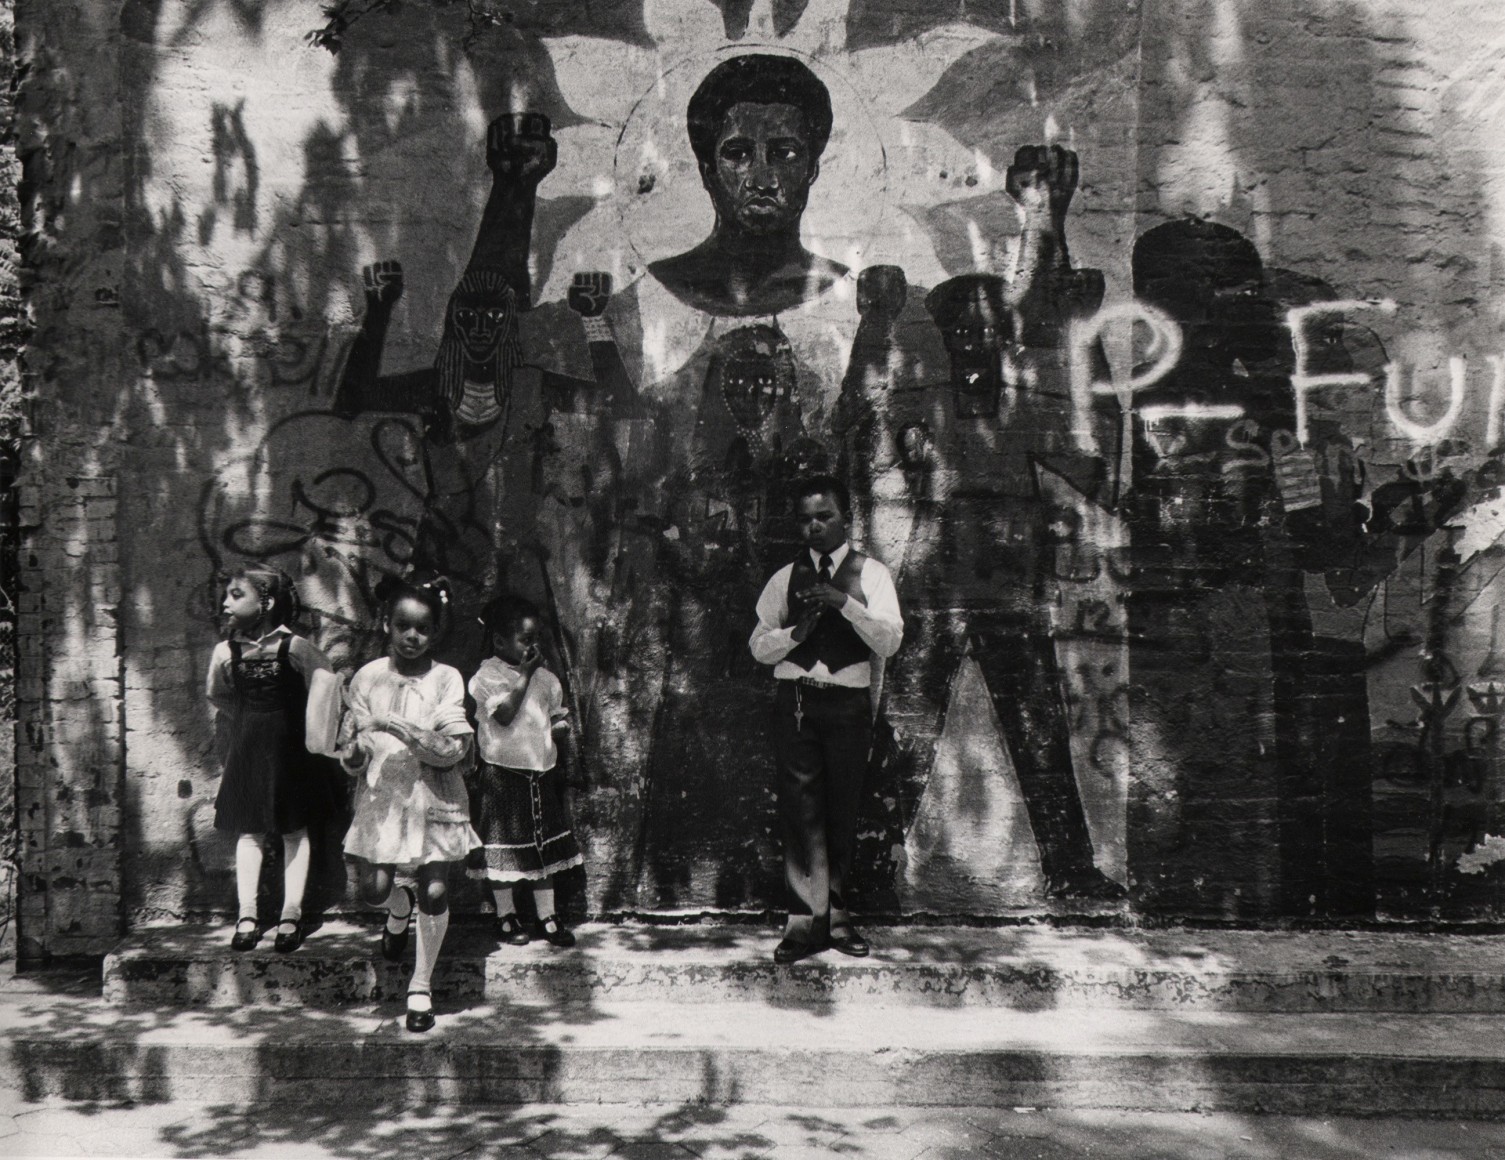 24. Beuford Smith, Kids in Park, NYC, ​c. 1970. Three young girls and one boy lean against a wall with a mural and graffiti in speckled light.